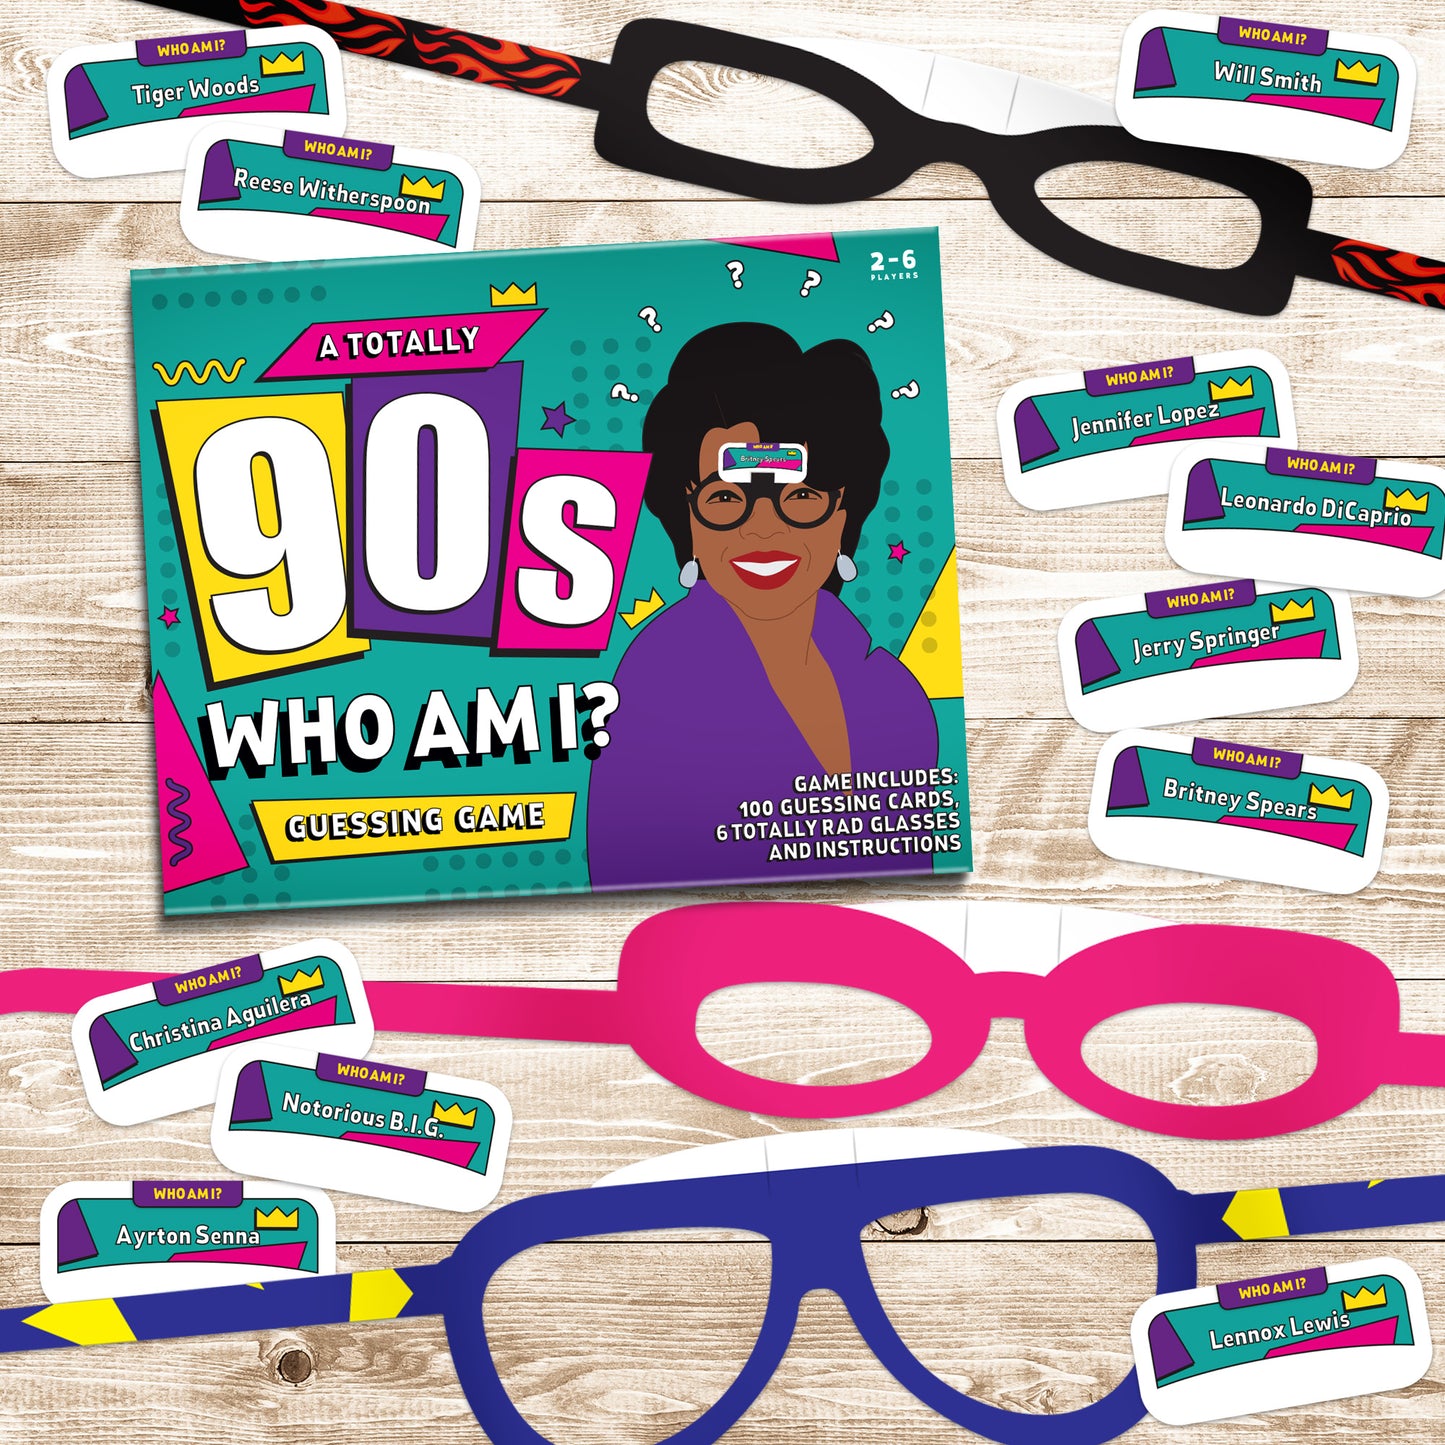 Game 90s Who Am I? -Gift Republic